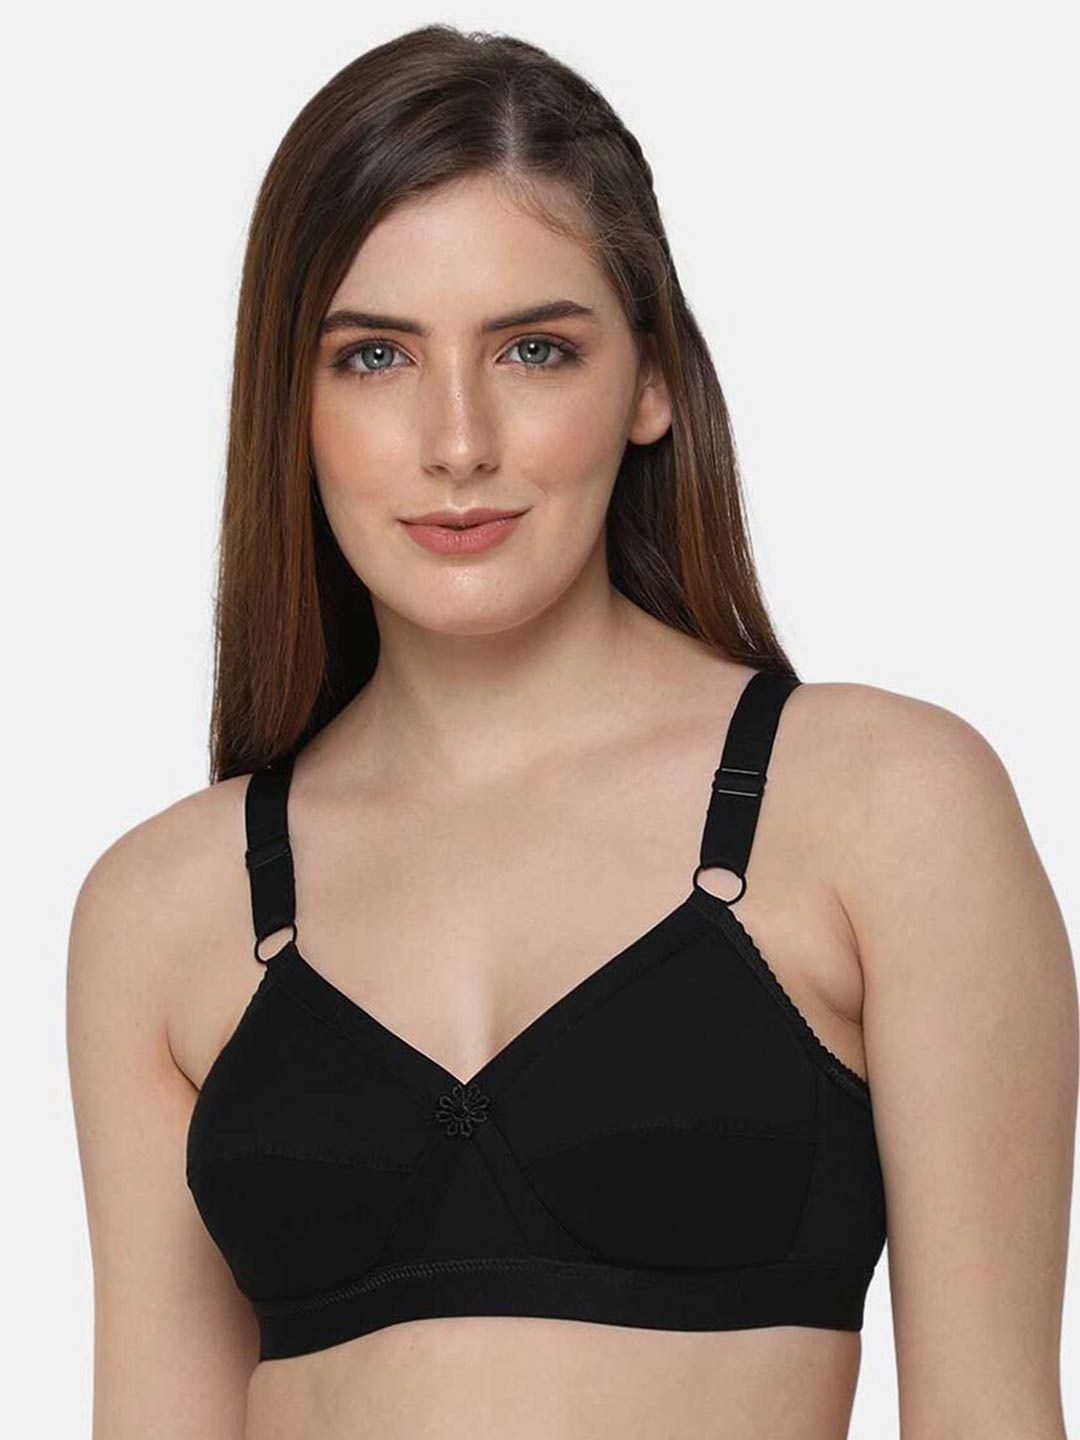 Buy Intimacy LINGERIE Full Coverage Cotton Bra With All Day Comfort - Bra  for Women 26591280